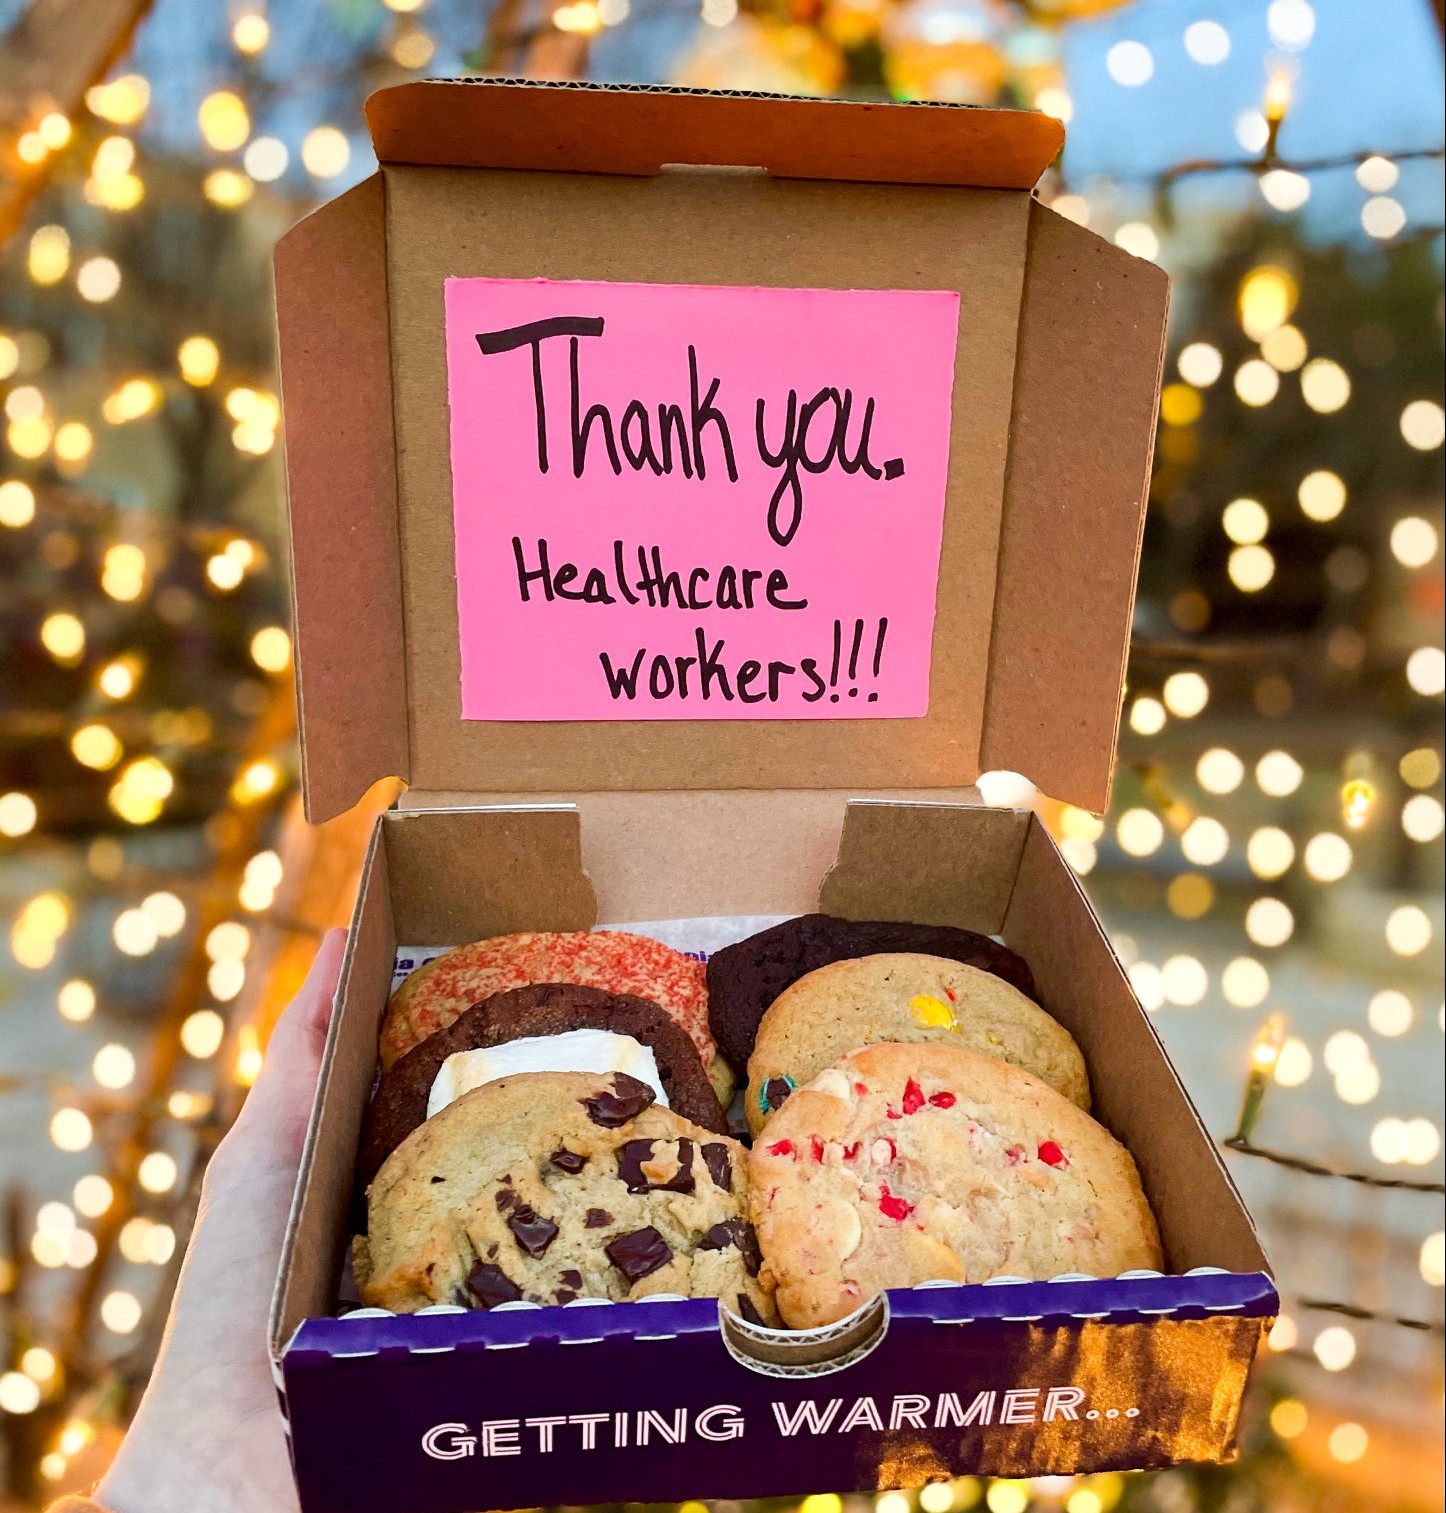 Insomnia Cookies offers free treats for healthcare workers ABC6